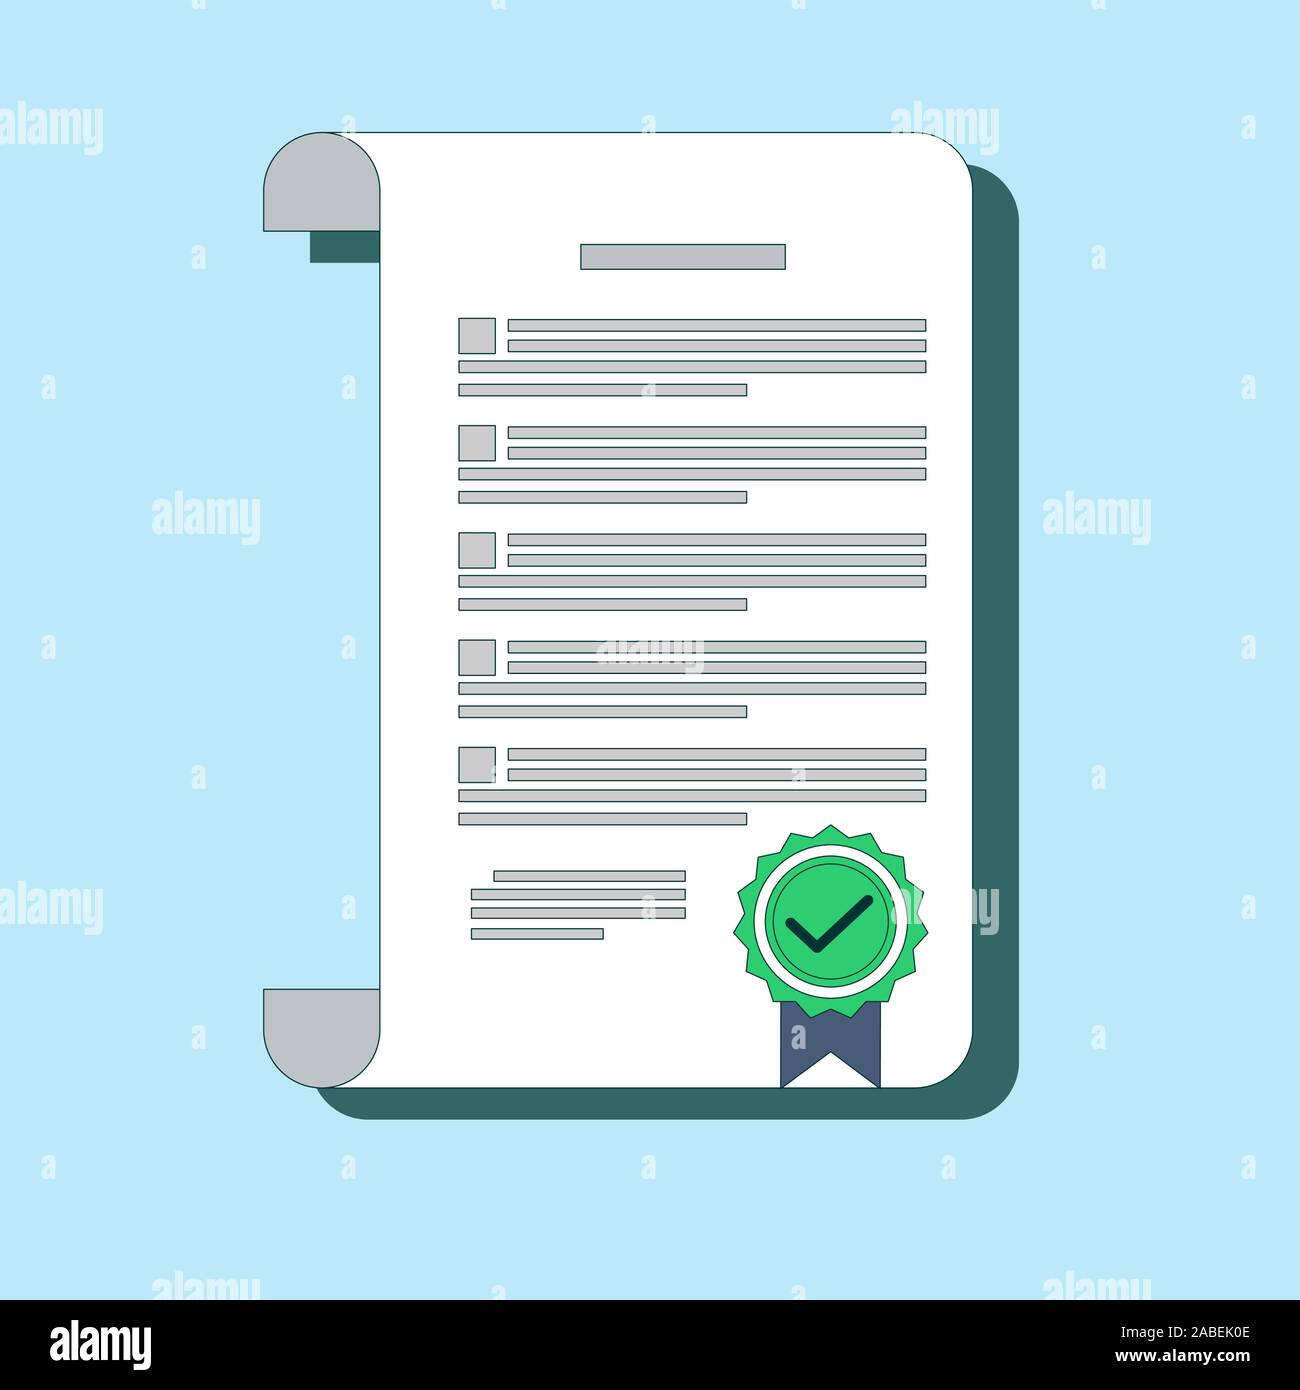 Contract vector icon in a flat style isolated on a colored background. Stock Vector